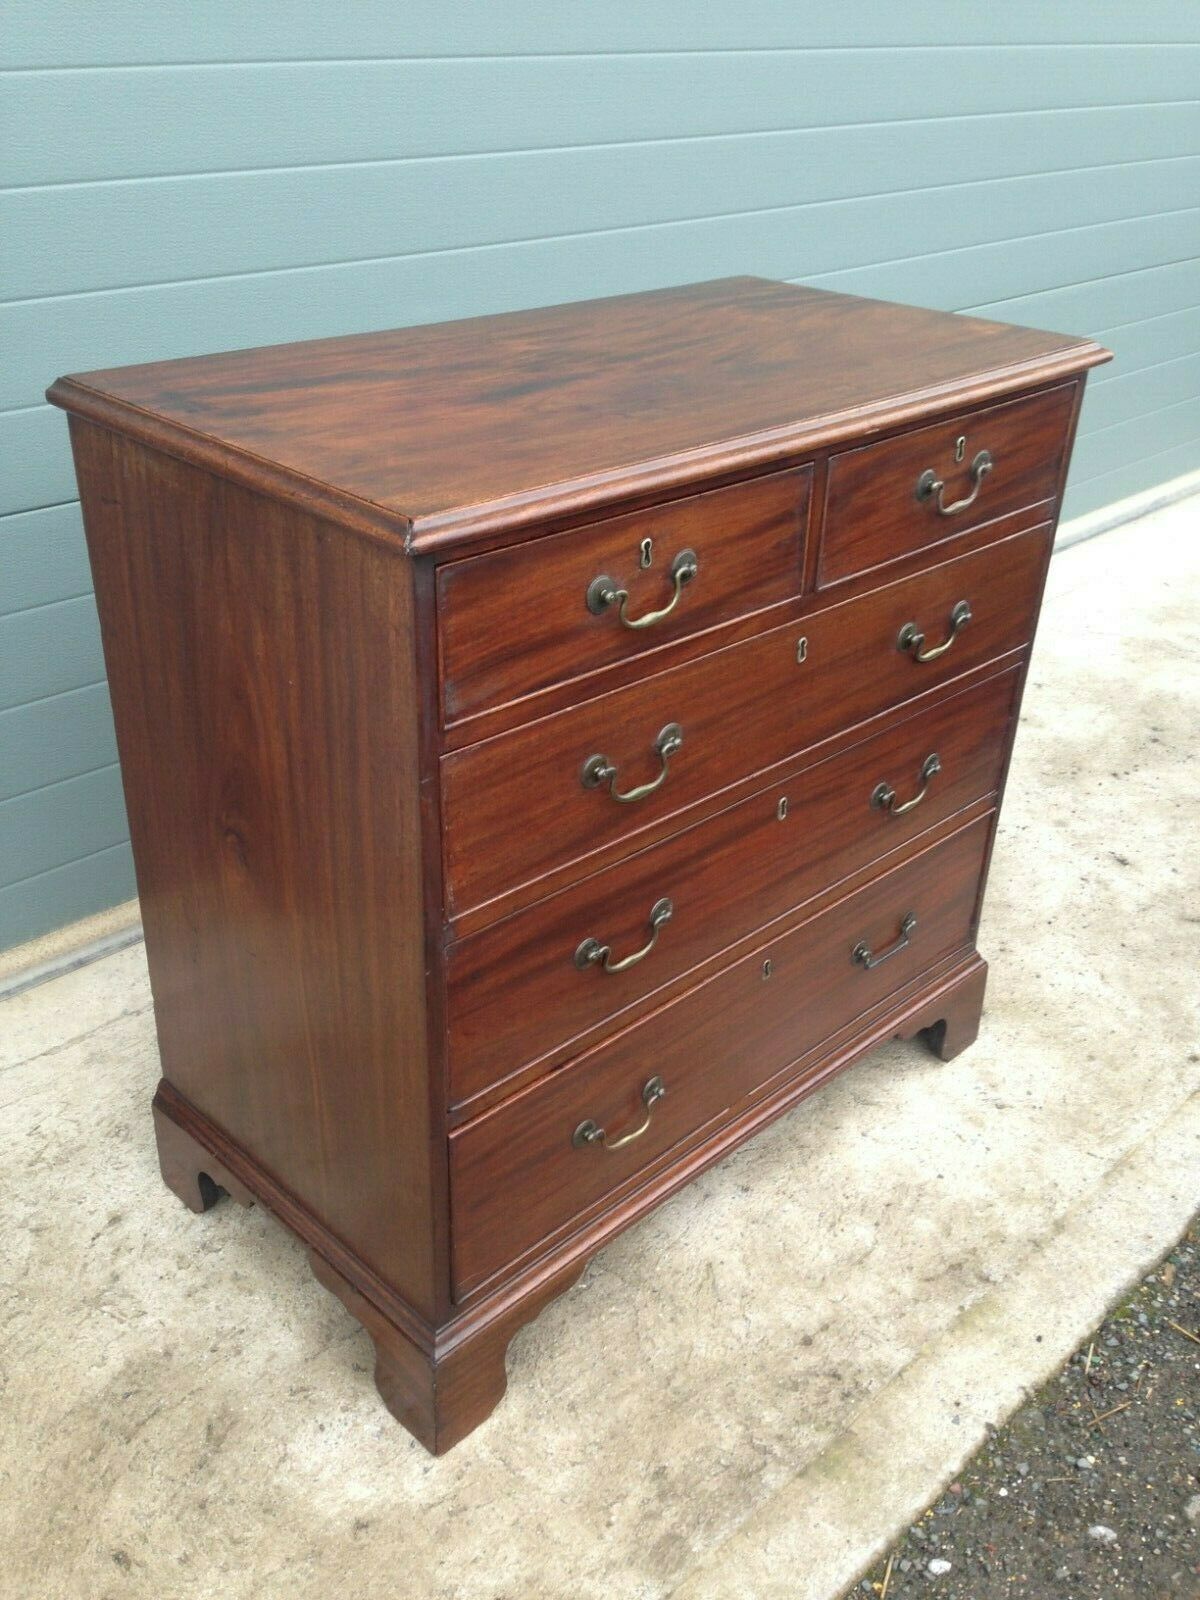 234.....Handsome Early Georgian Mahogany Chest / Antique Chest Of Drawers ( SOLD )